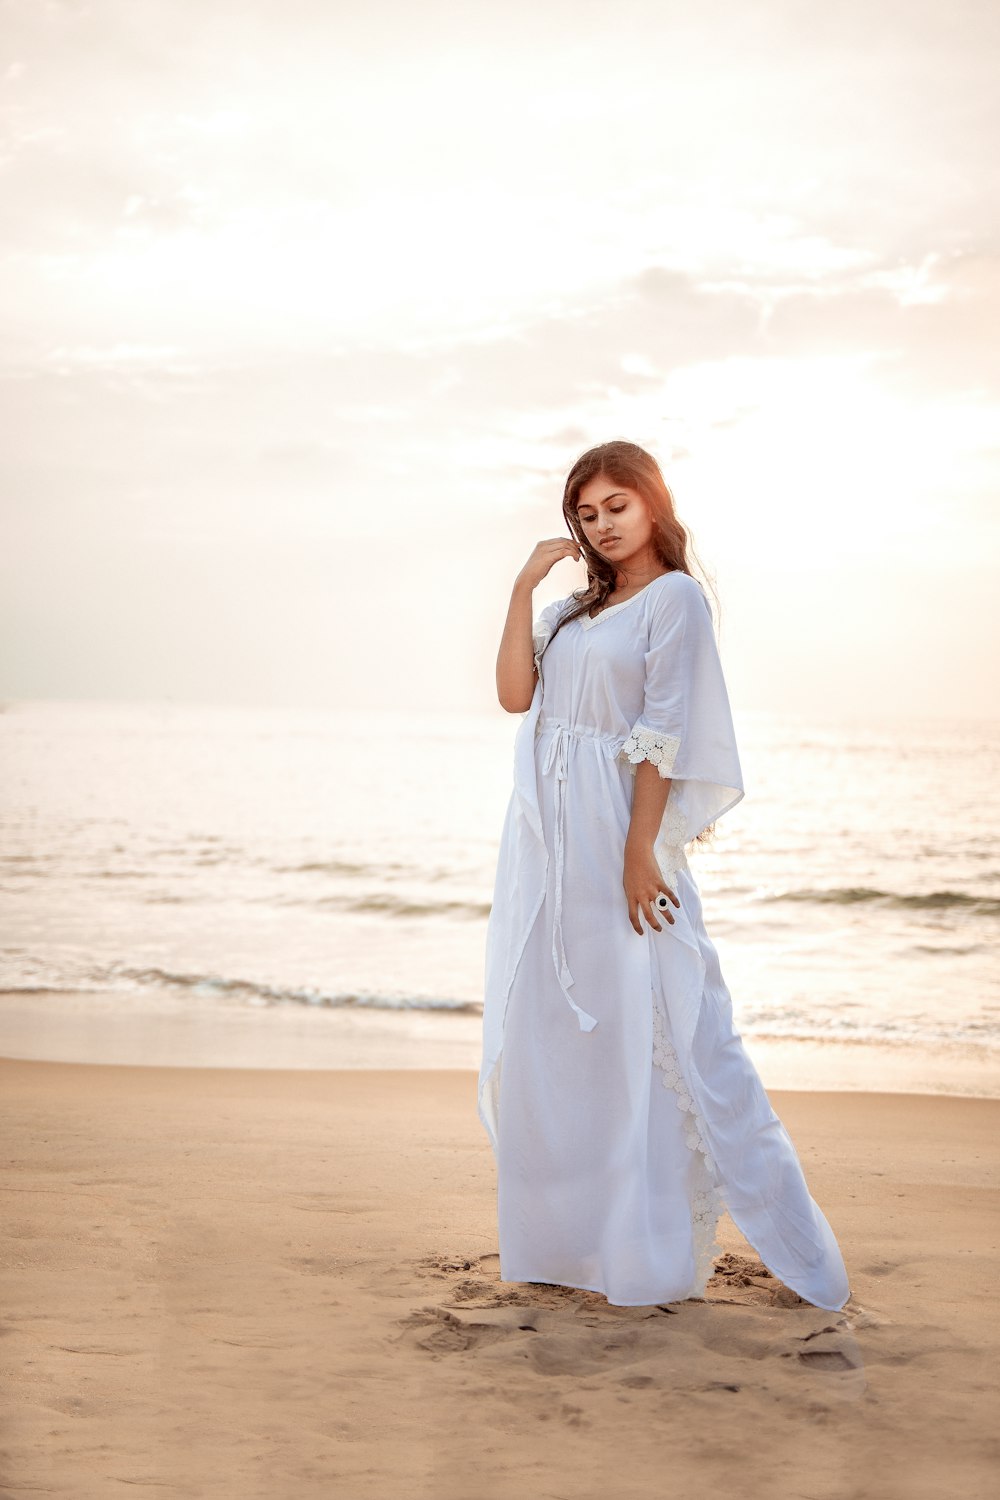 a woman in a white dress standing on a beach